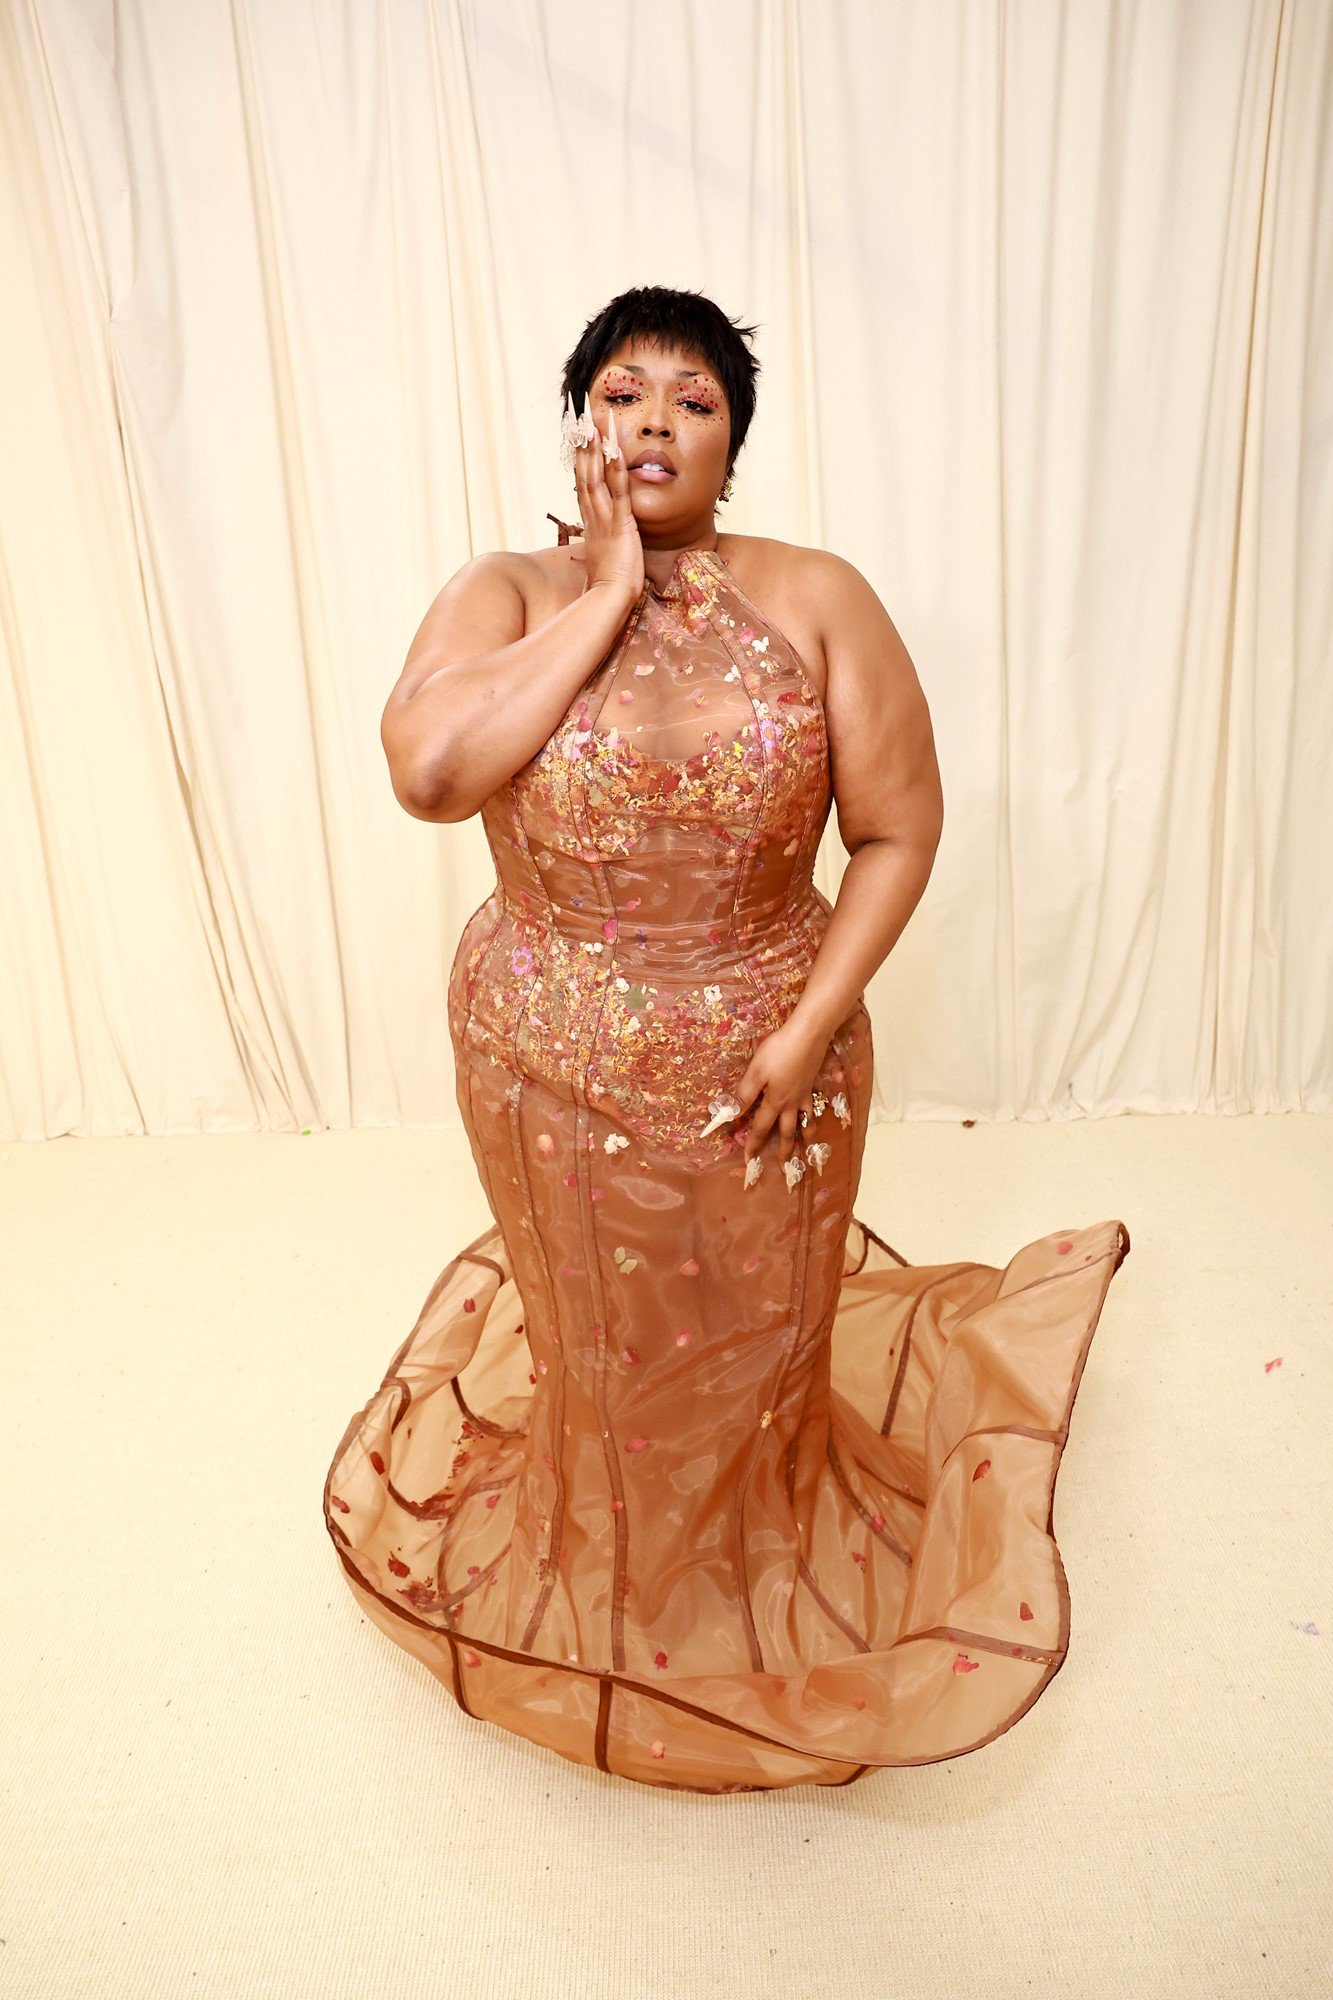 Lizzo poses with her hand on her cheek in her sequined gown.